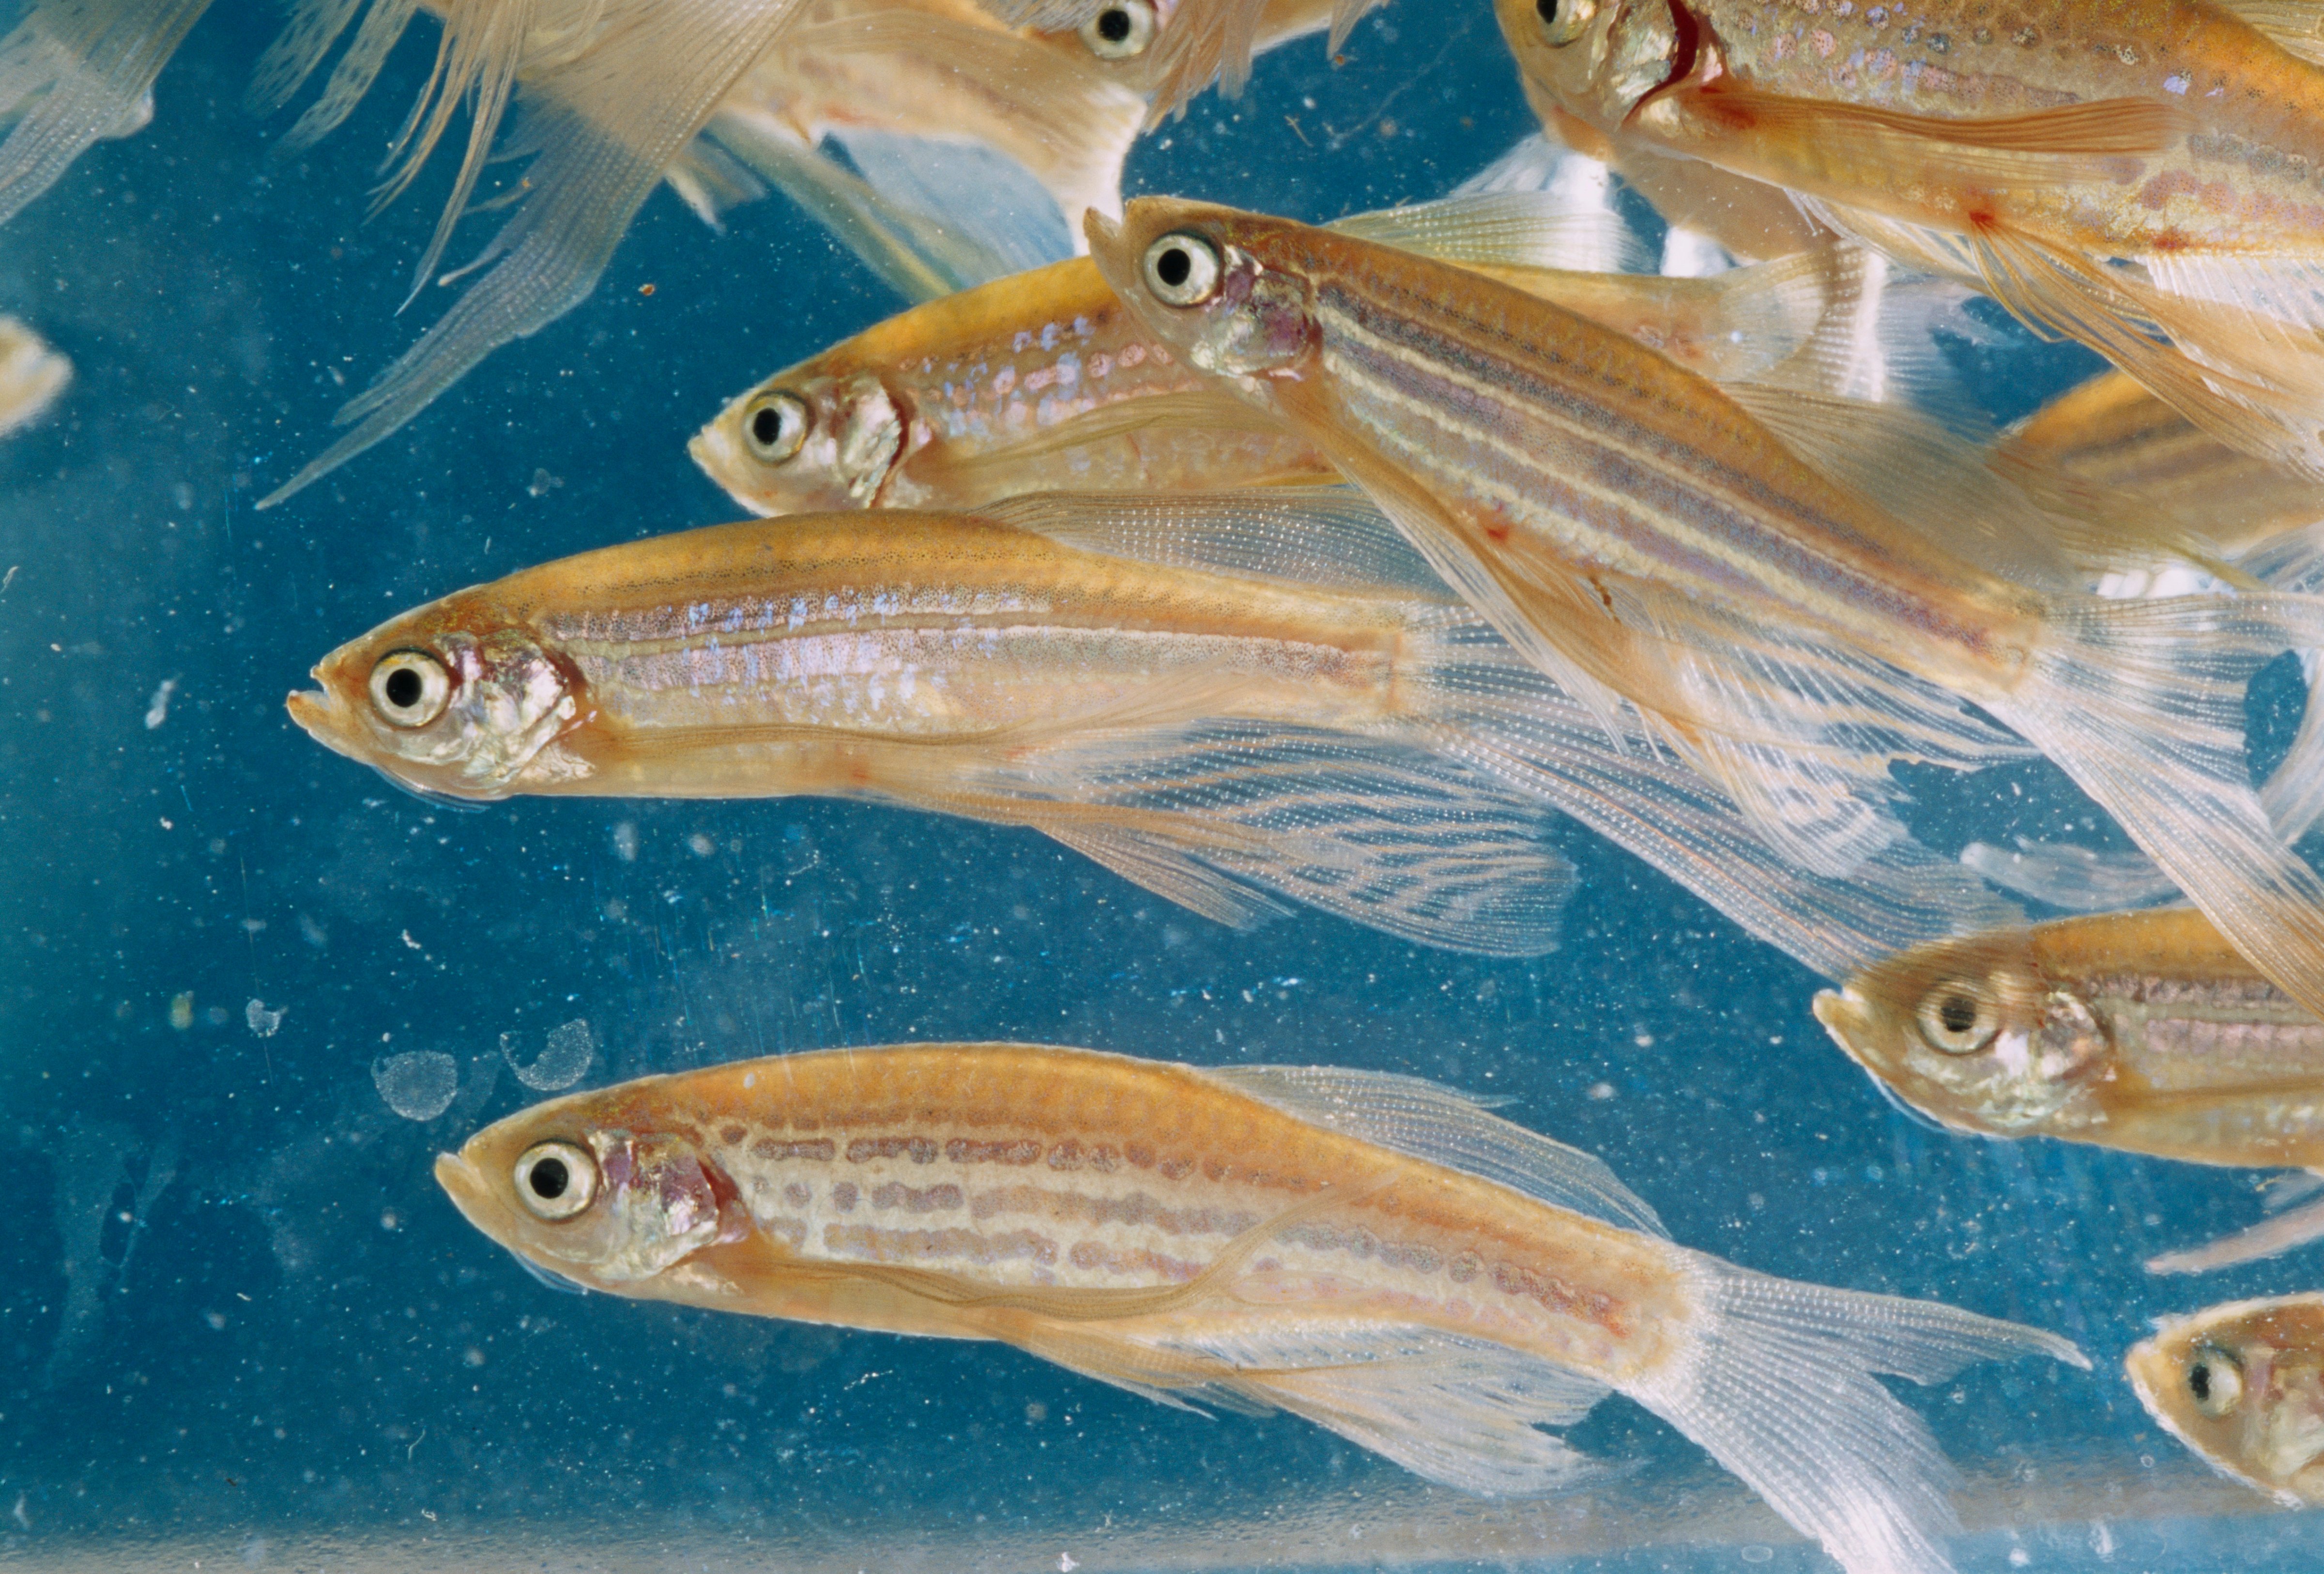 Zebra fish multiply in a water tank at N.I.H. (Getty Images)